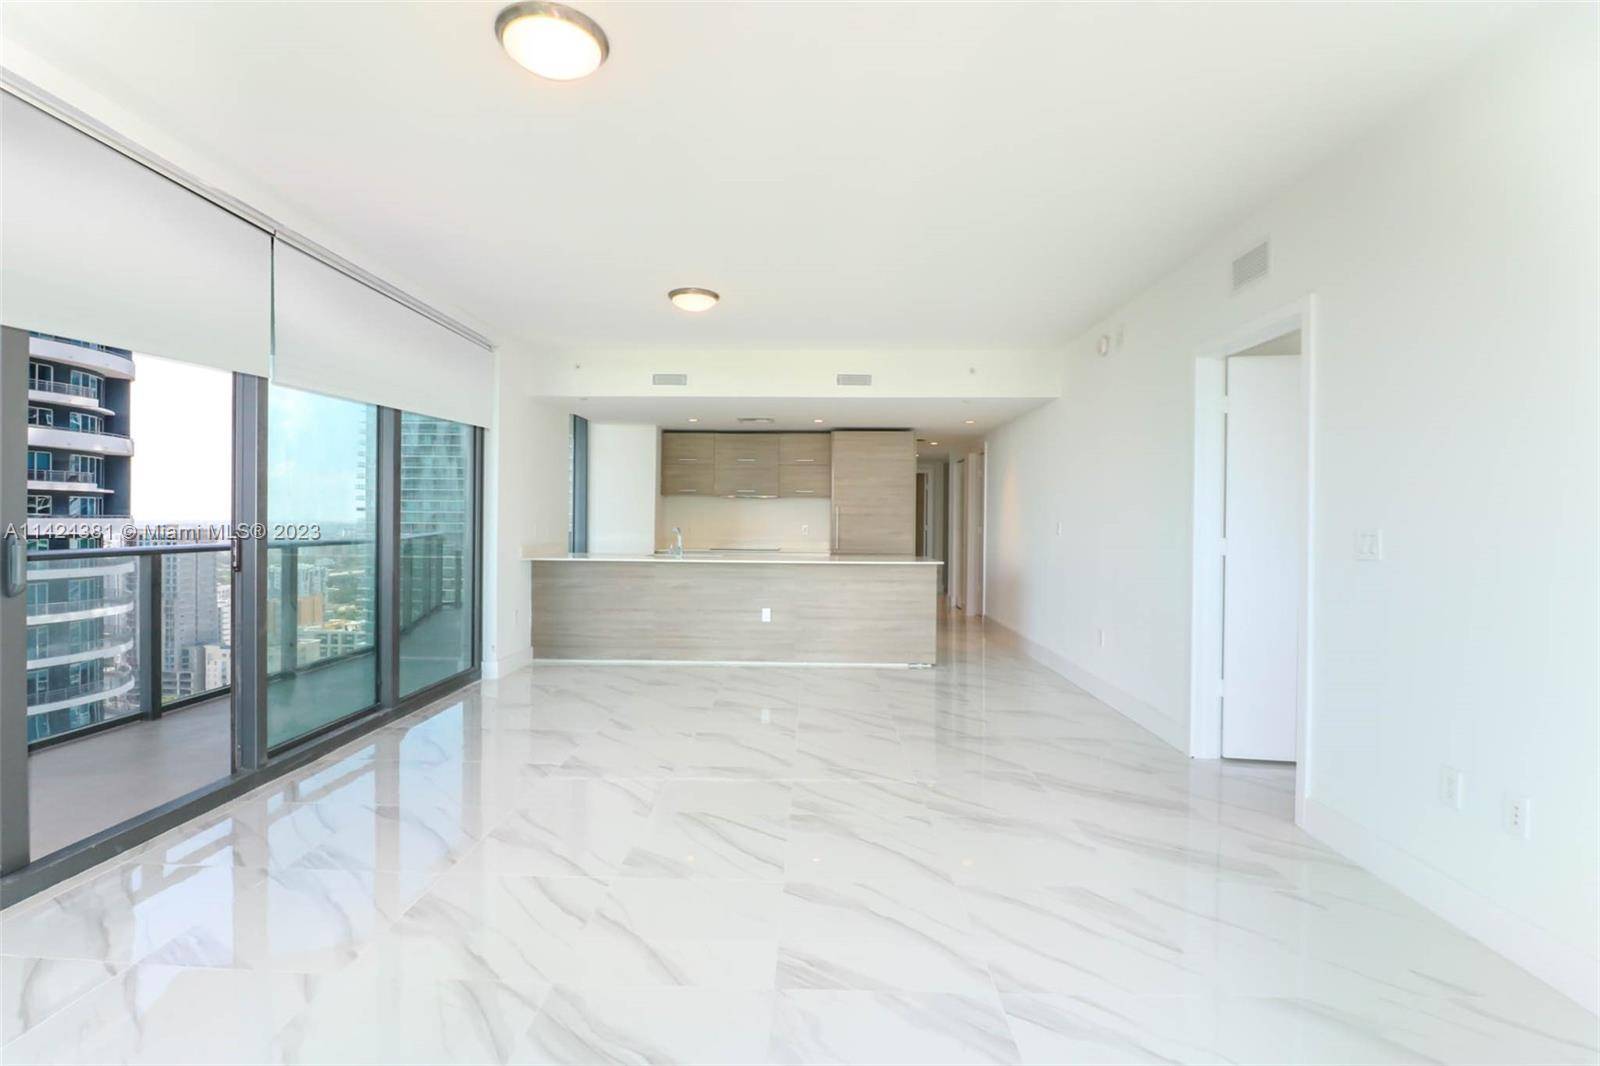 Enjoy Living on this LUXURY lifestyle CORNER 3Beds 2Baths 1HalfBaath condo with BREATHTAKING VIEWS from Intracoastal and Miami Skyline.